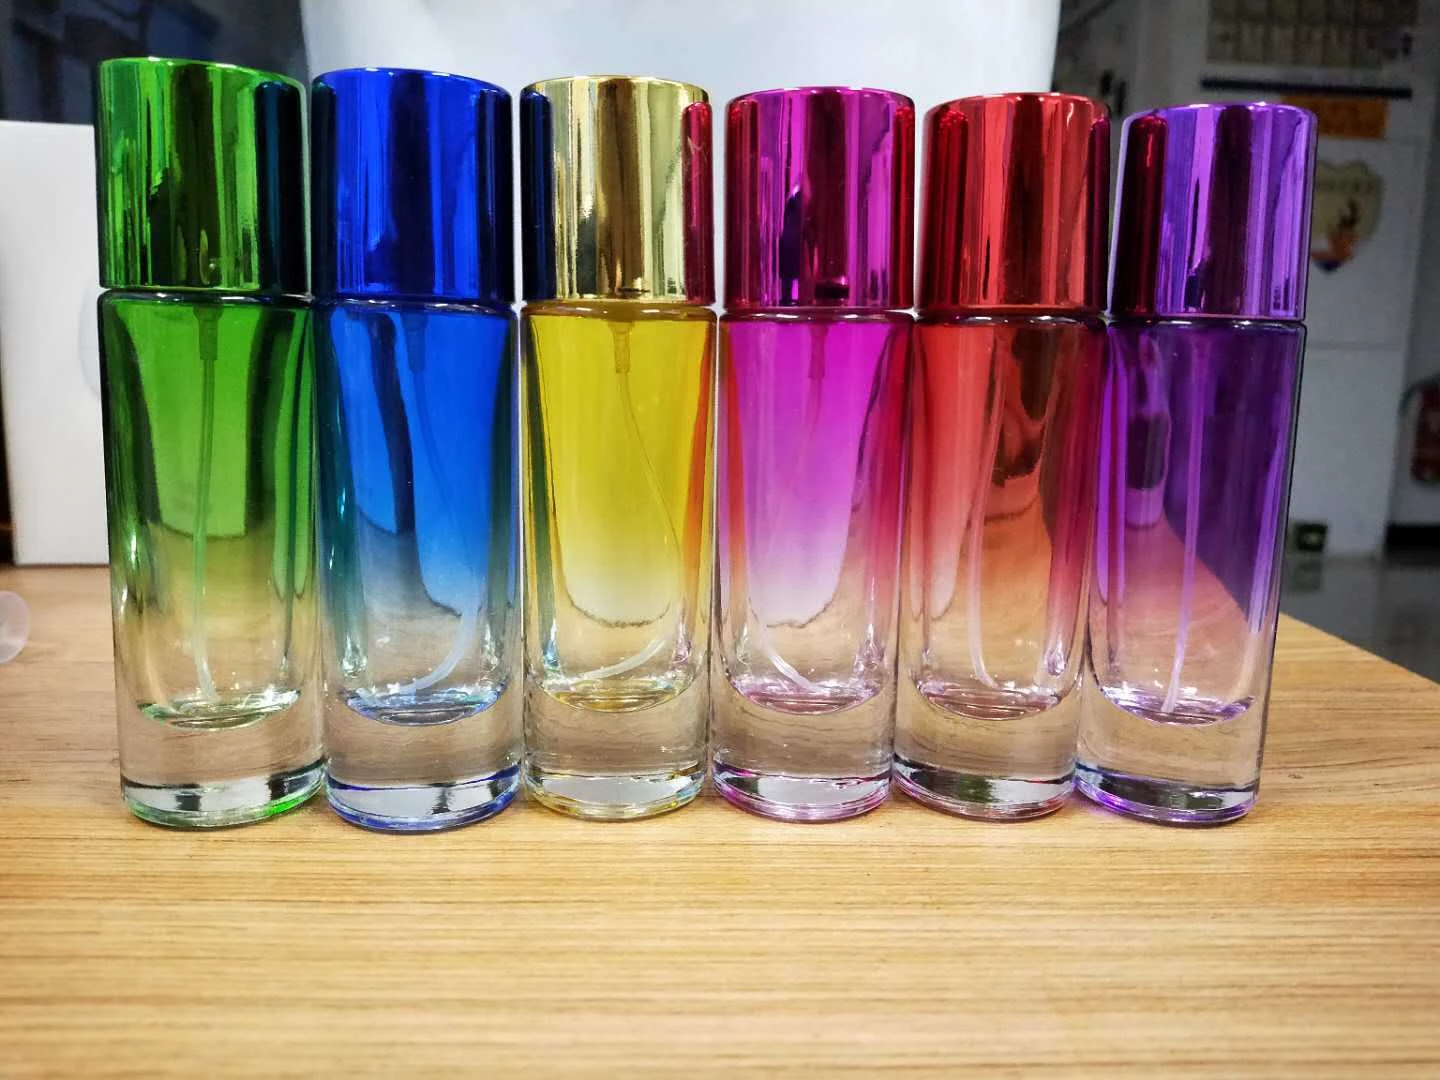 MUB High Quality Colorful 30ml Glass Spray Bottle Empty Refillable Cylinder Shape Glass Perfume Bottles With Aluminum Pumps